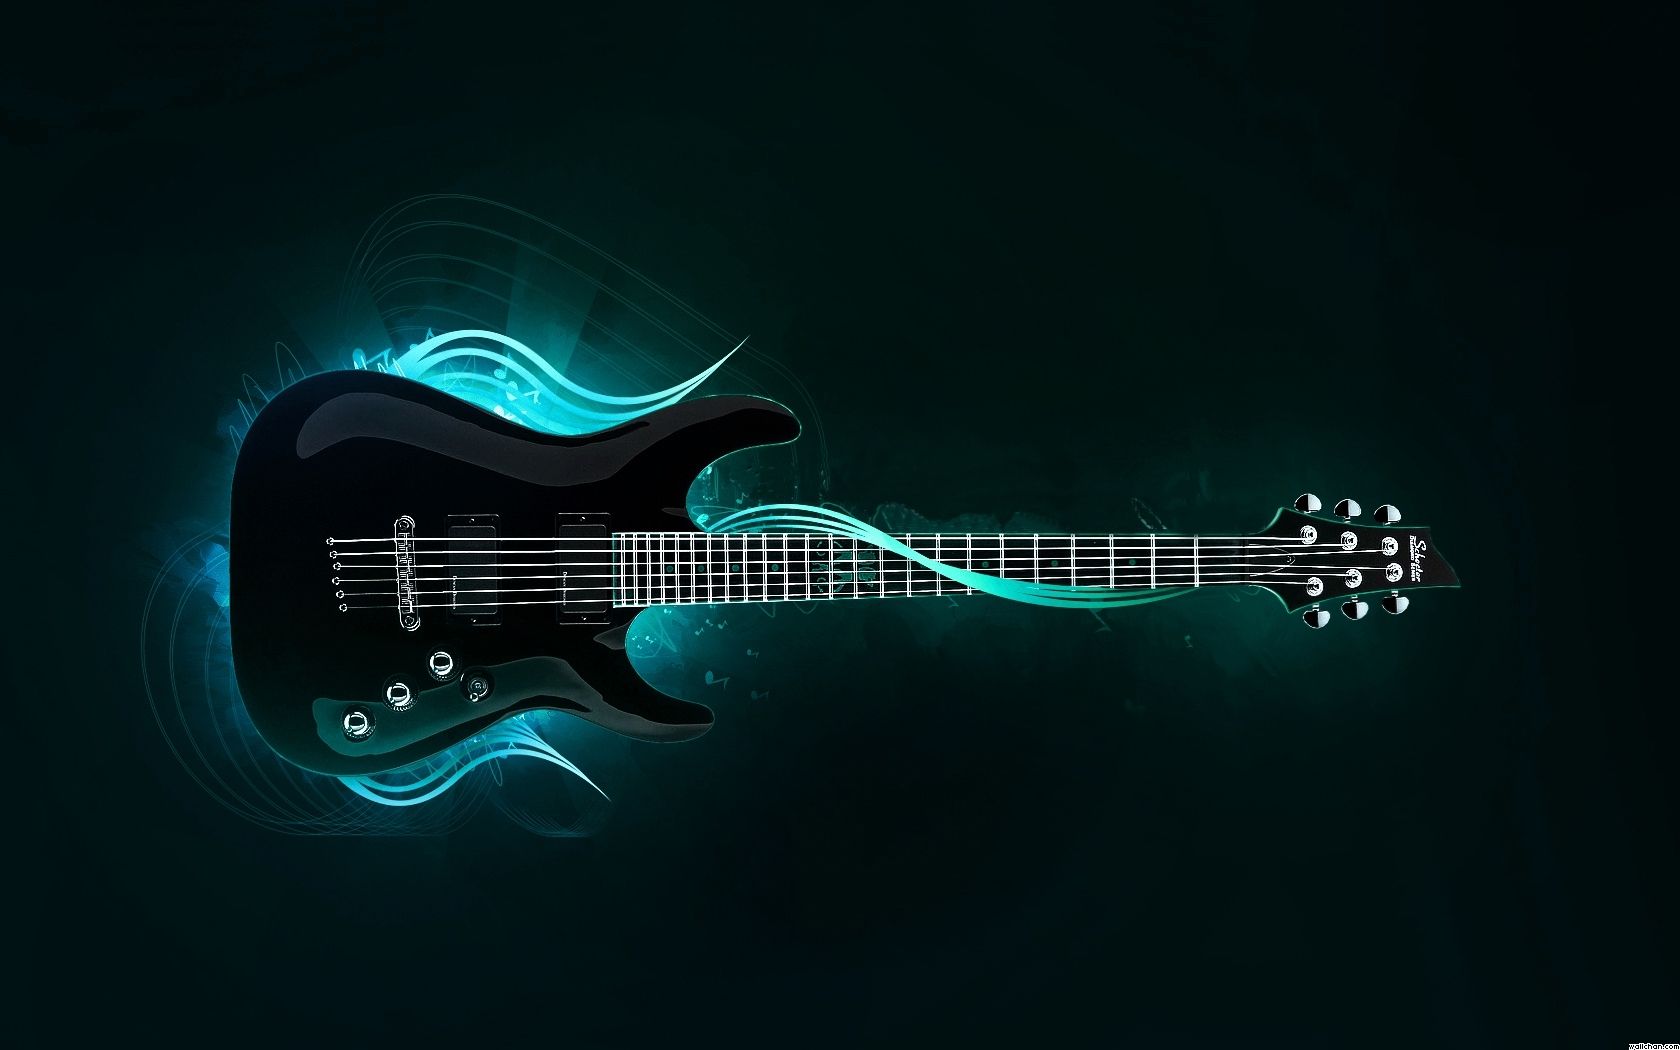 Black guitar with neon blue cosmic rays wrapping around the body of the guitar